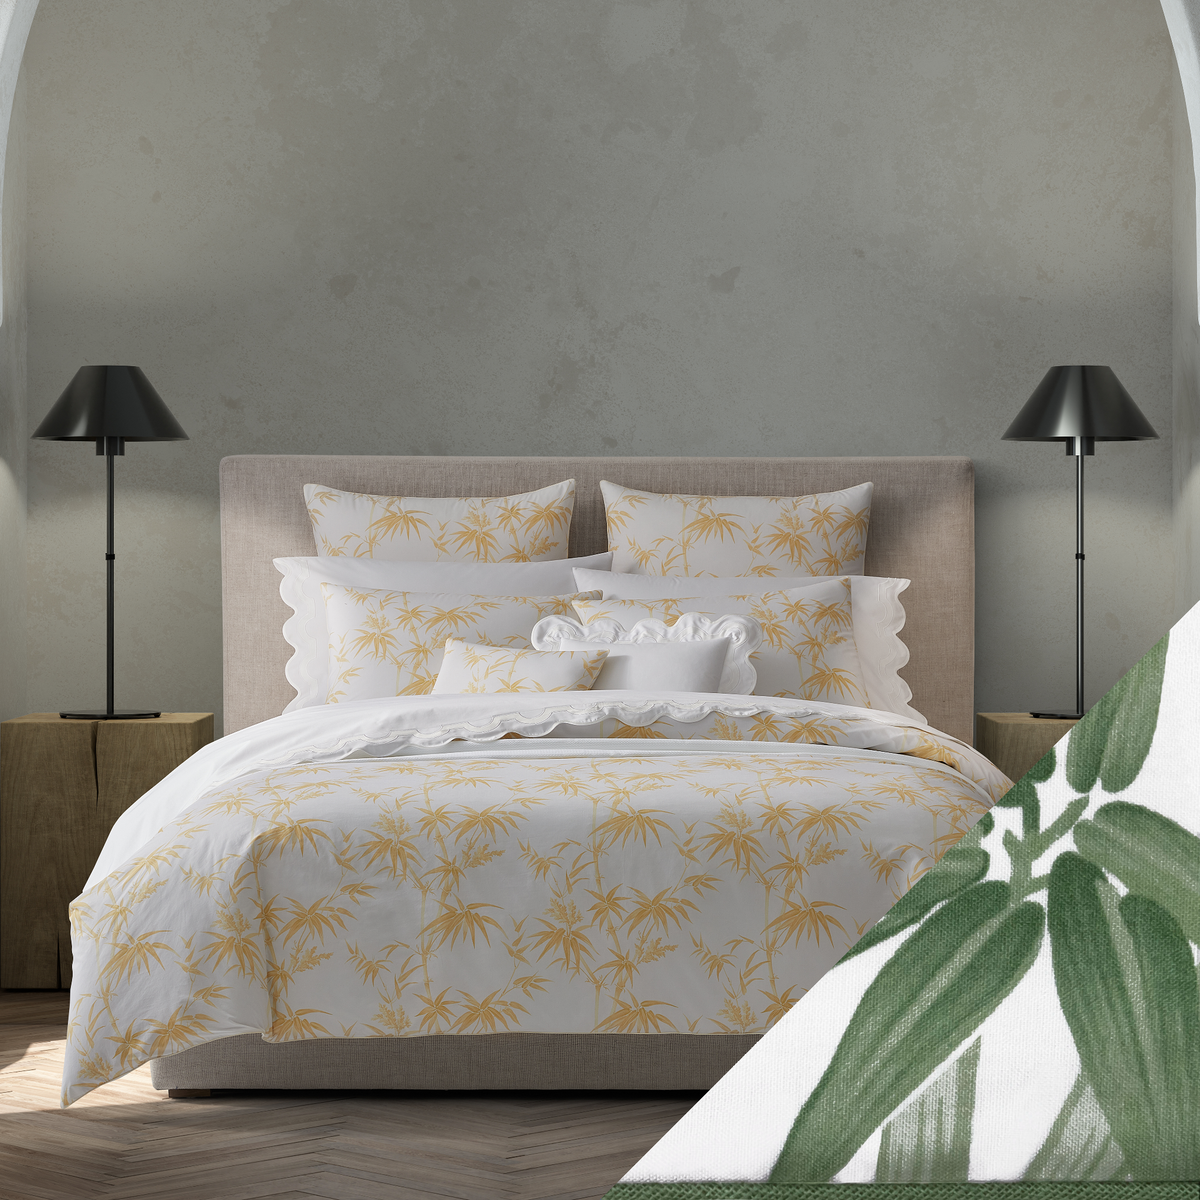 Full Bed in Matouk Schumacher Dominique Bedding in Lemon Color with Palm Swatch